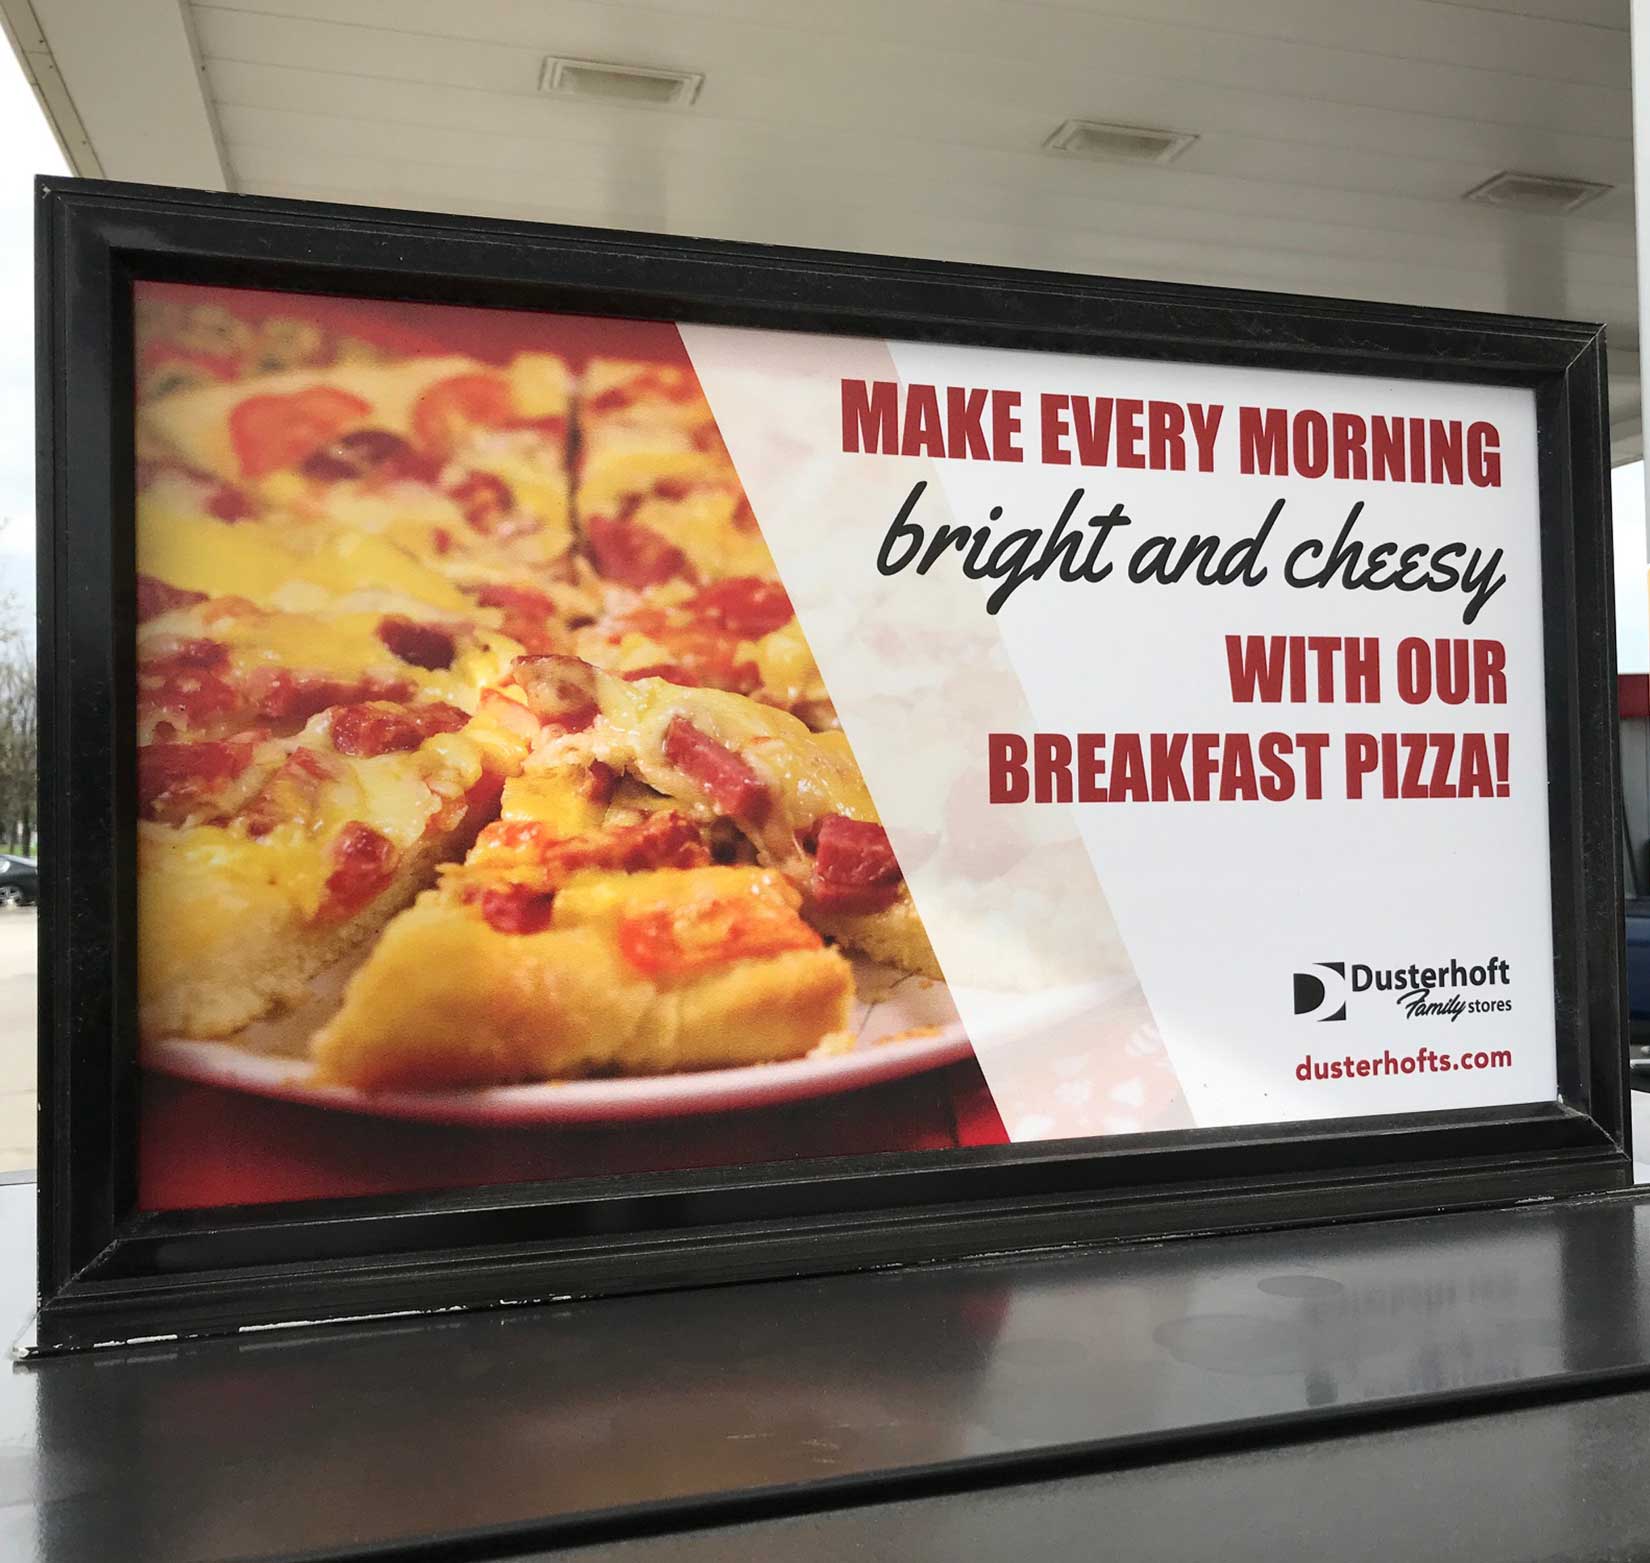 A printed poster advertising breakfast pizza at Dusterhoft Family Stores